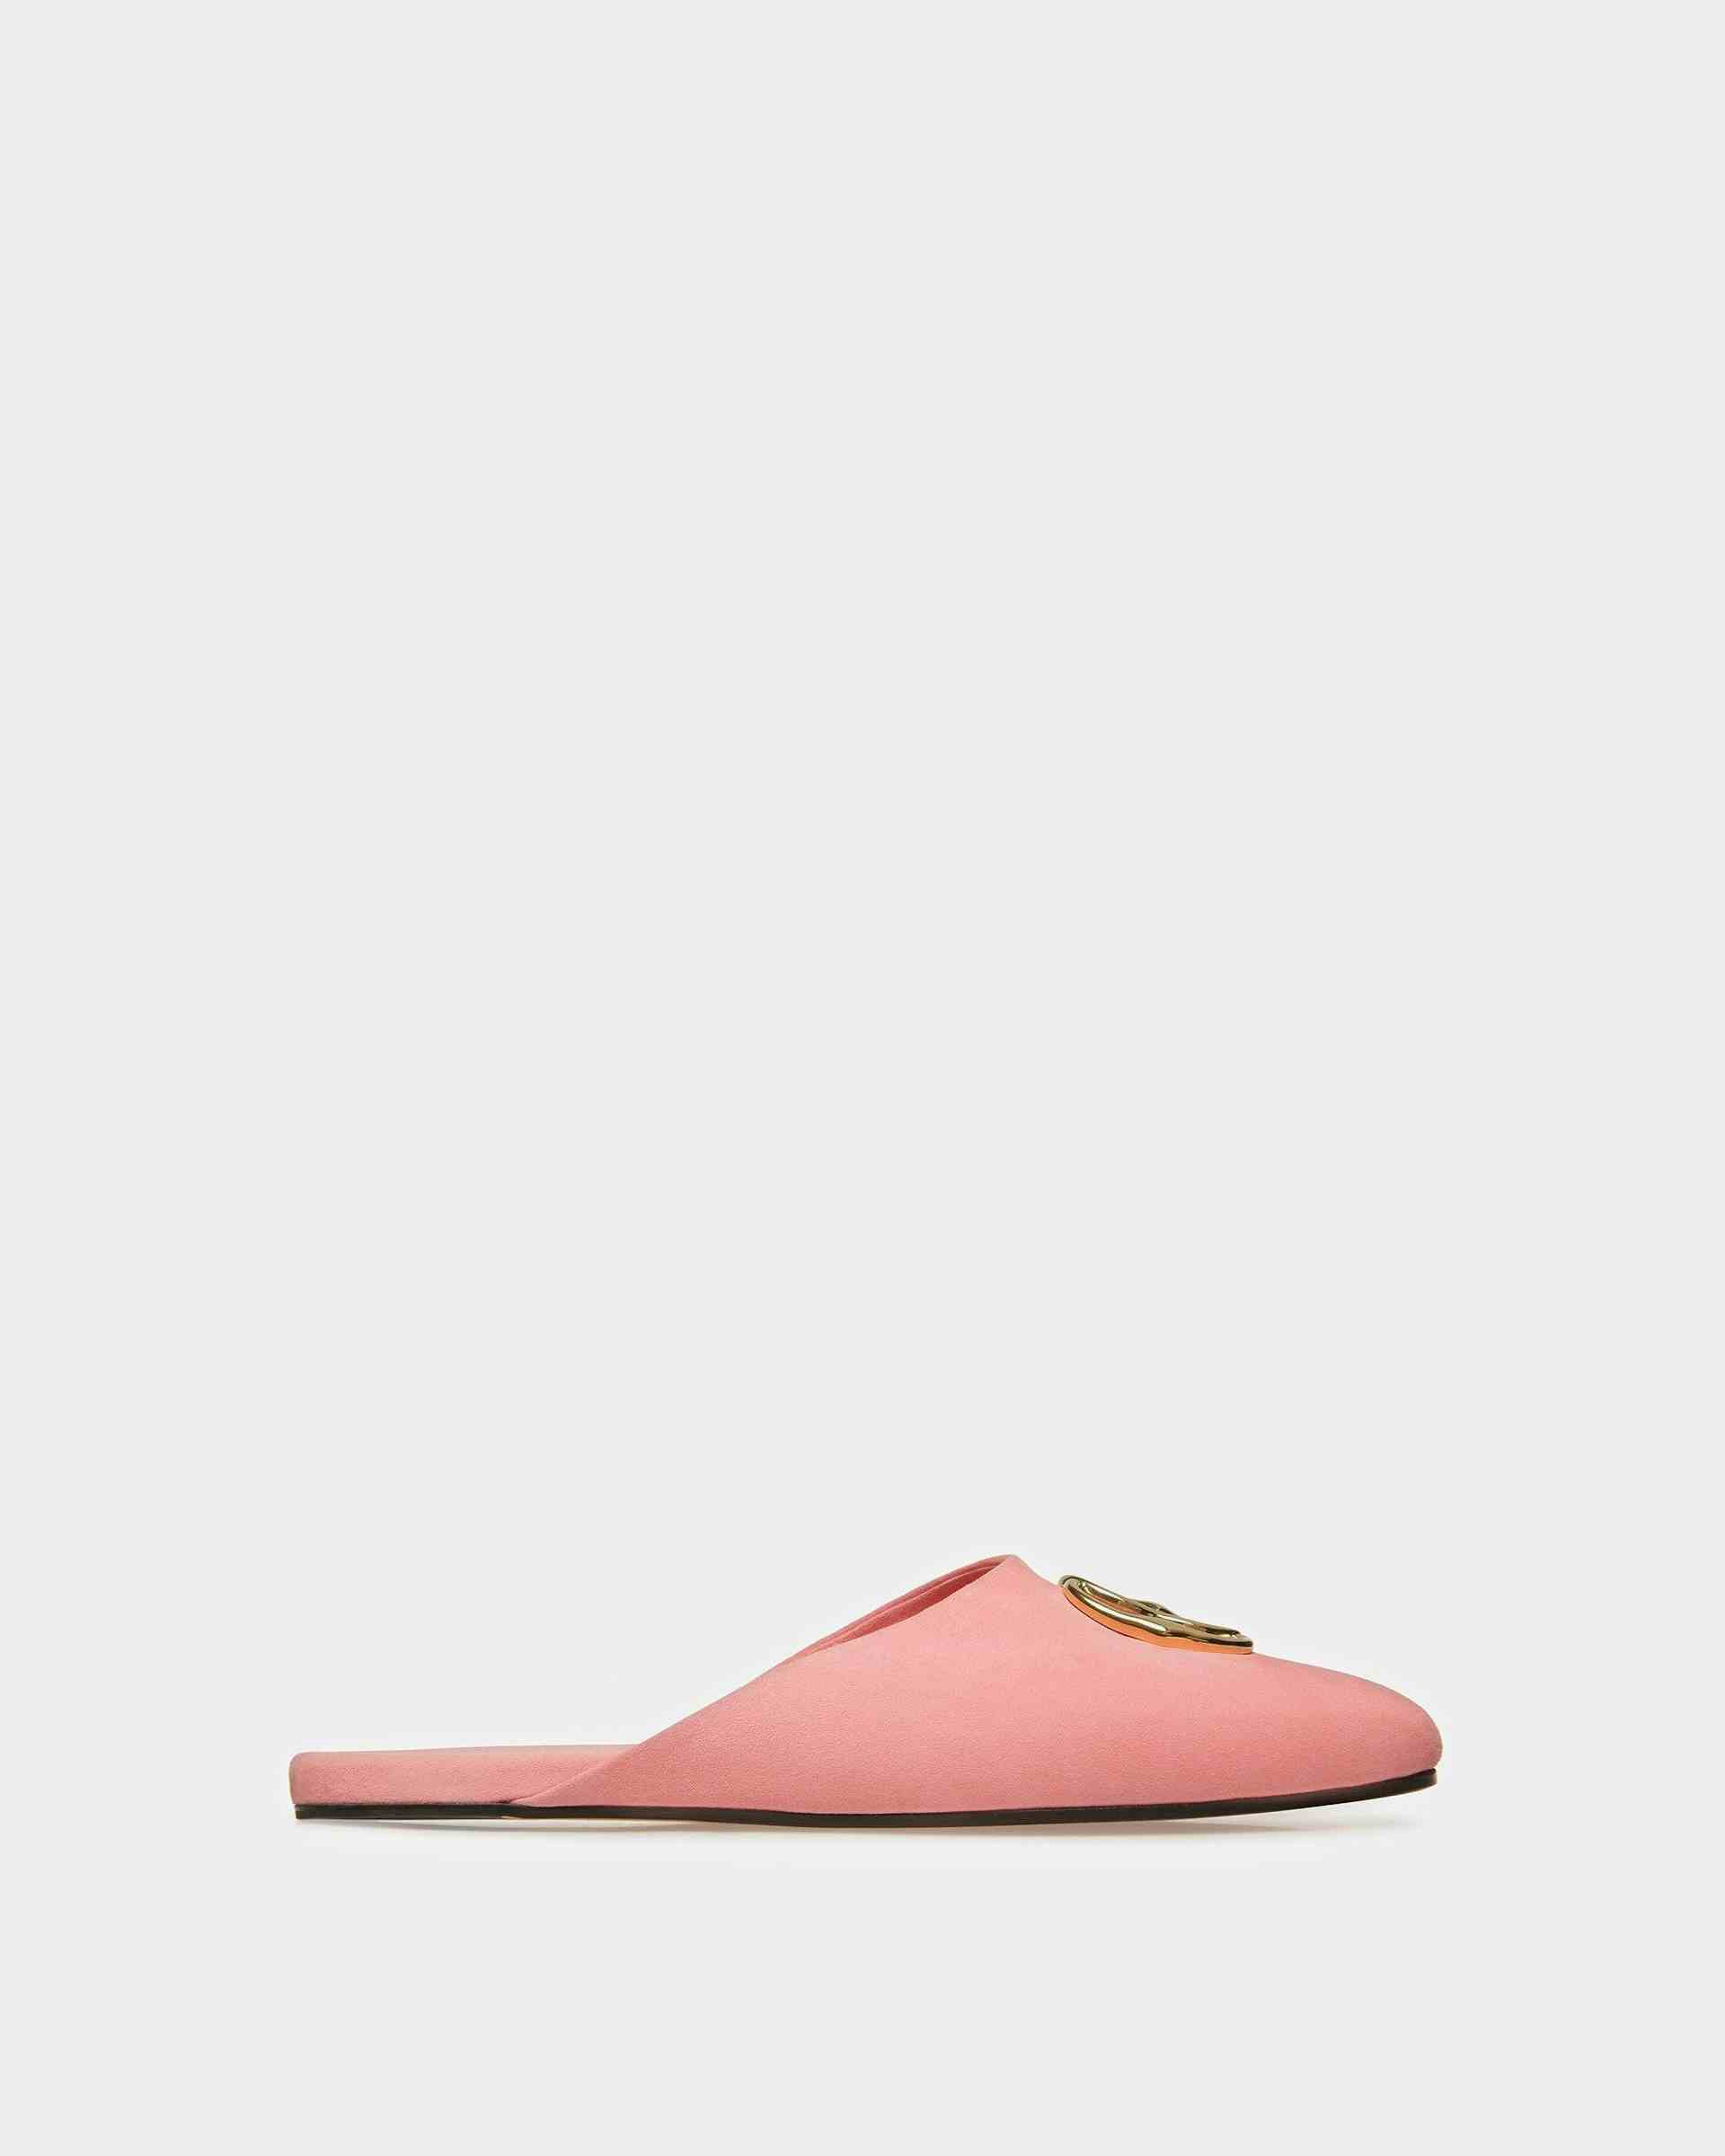 Emblem Loafer In Suede - Women's - Bally